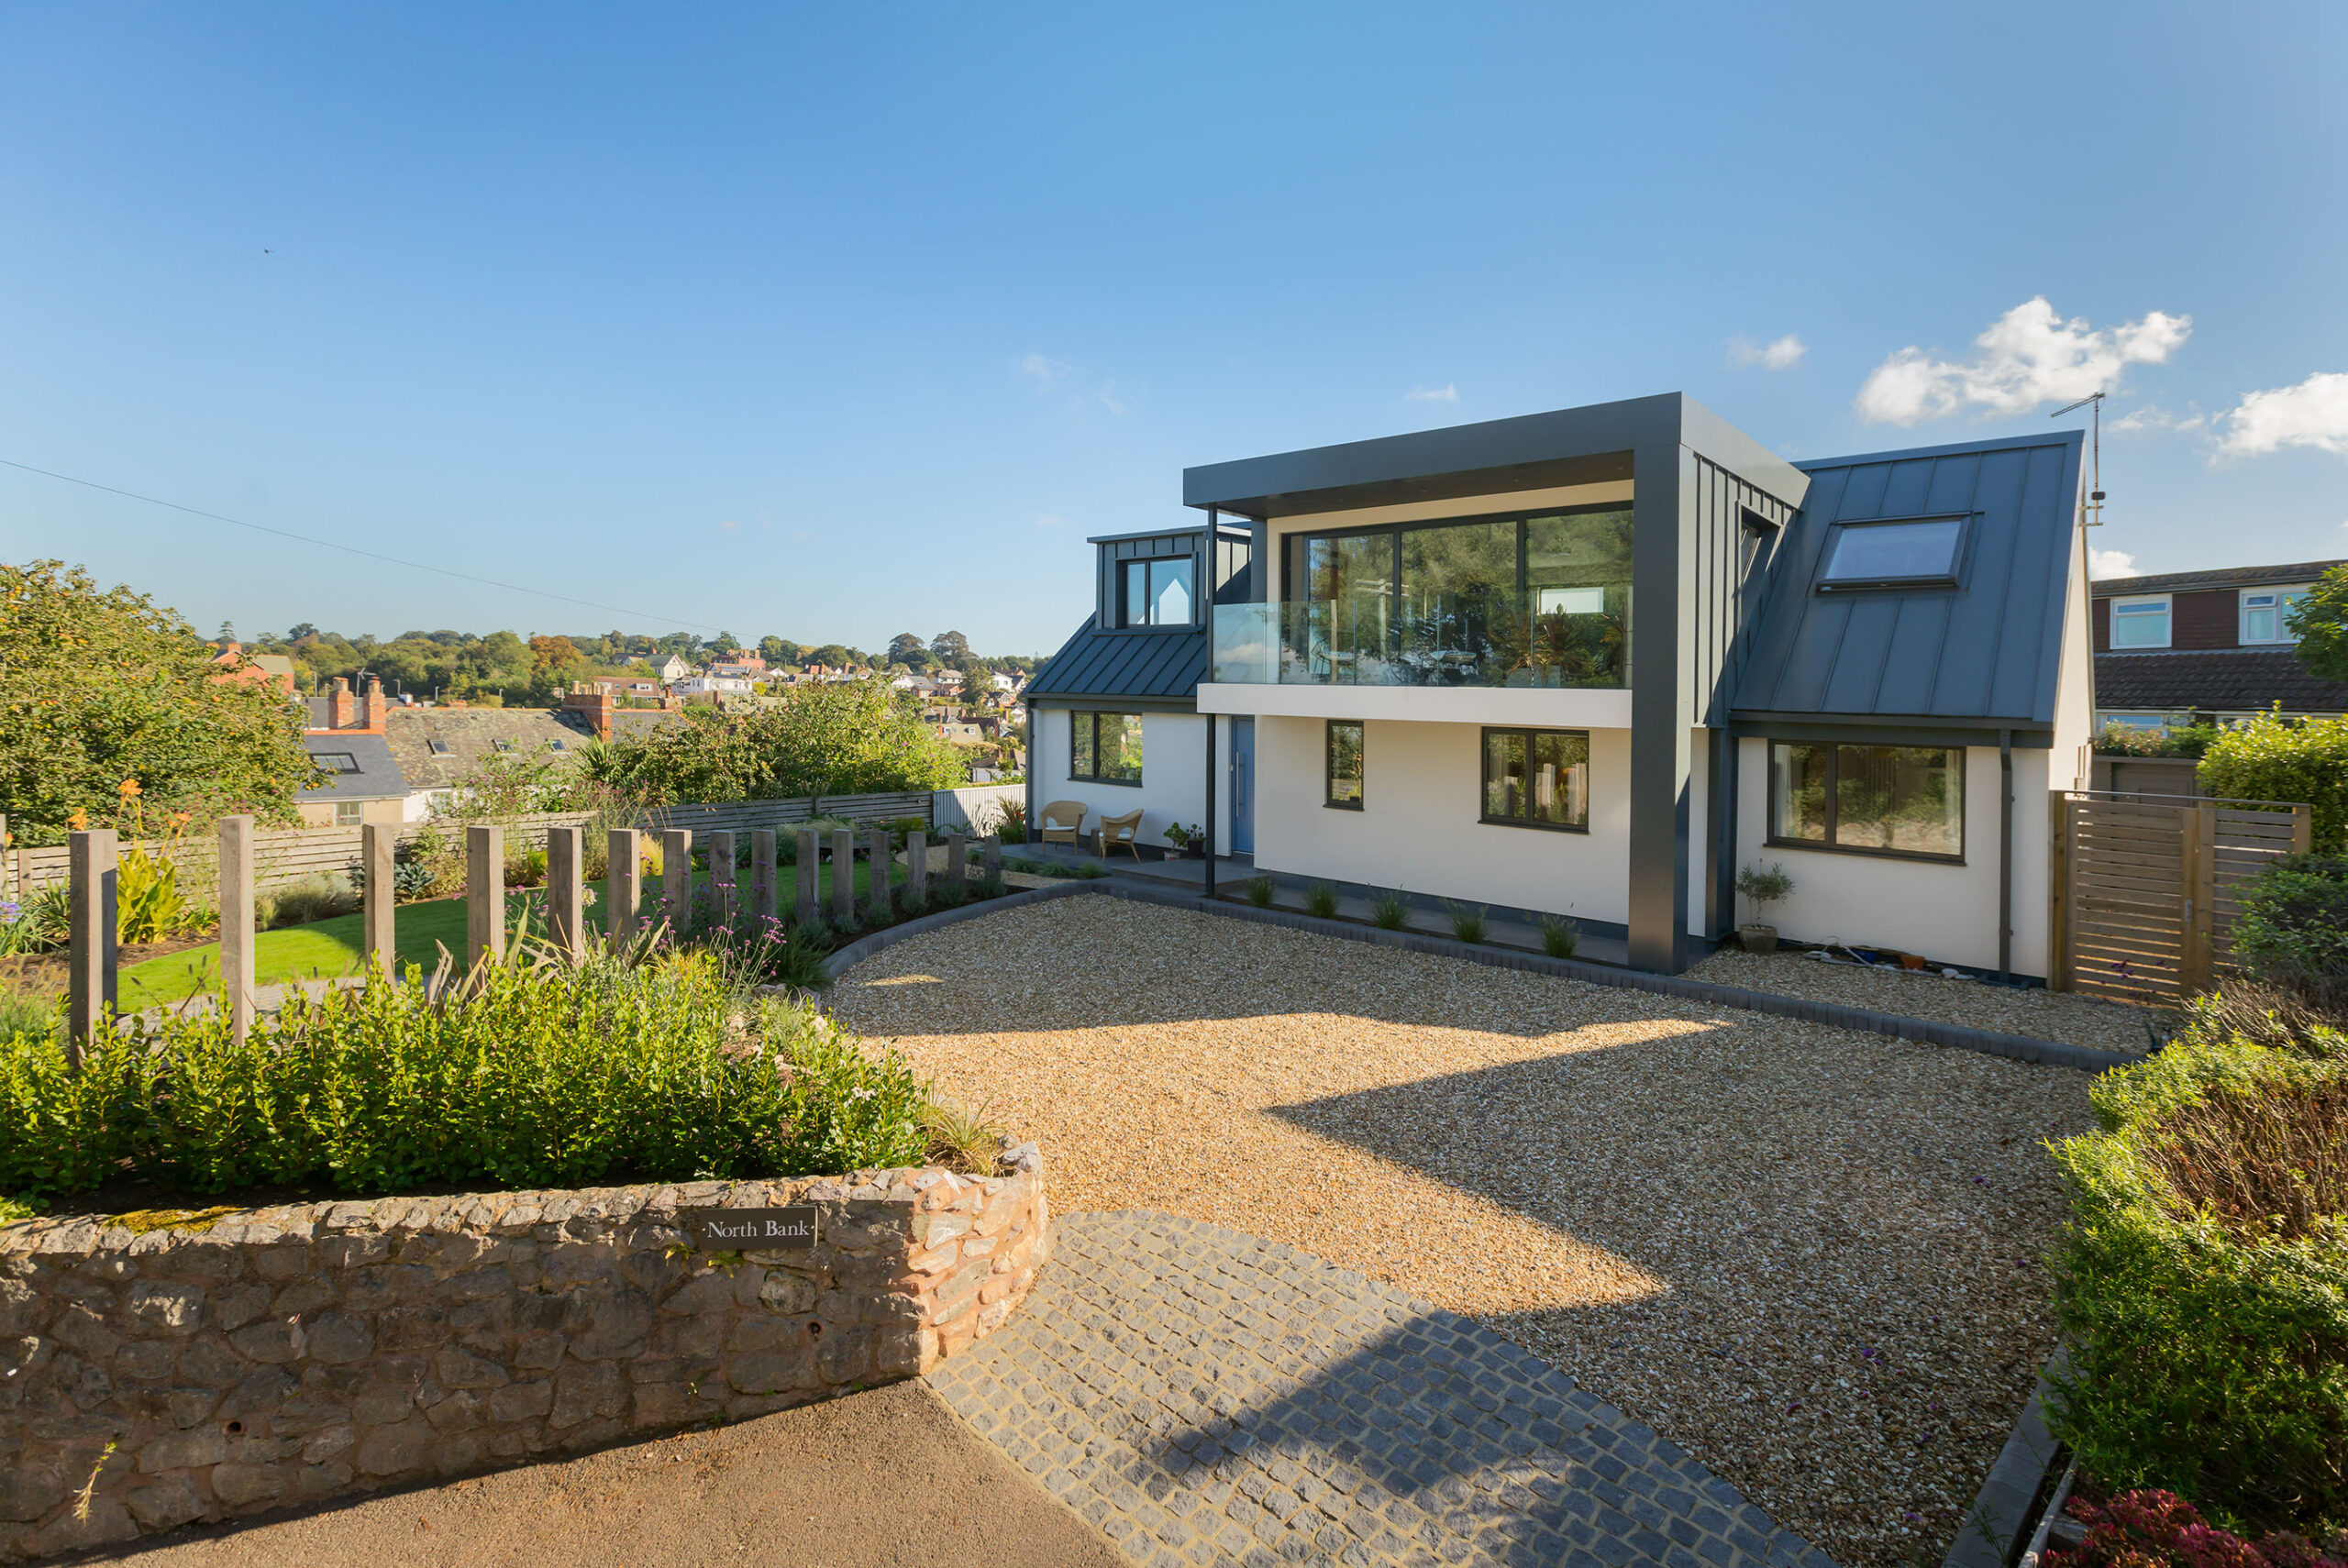 New contemporary home in Lympstone showing the front elevation and driveway